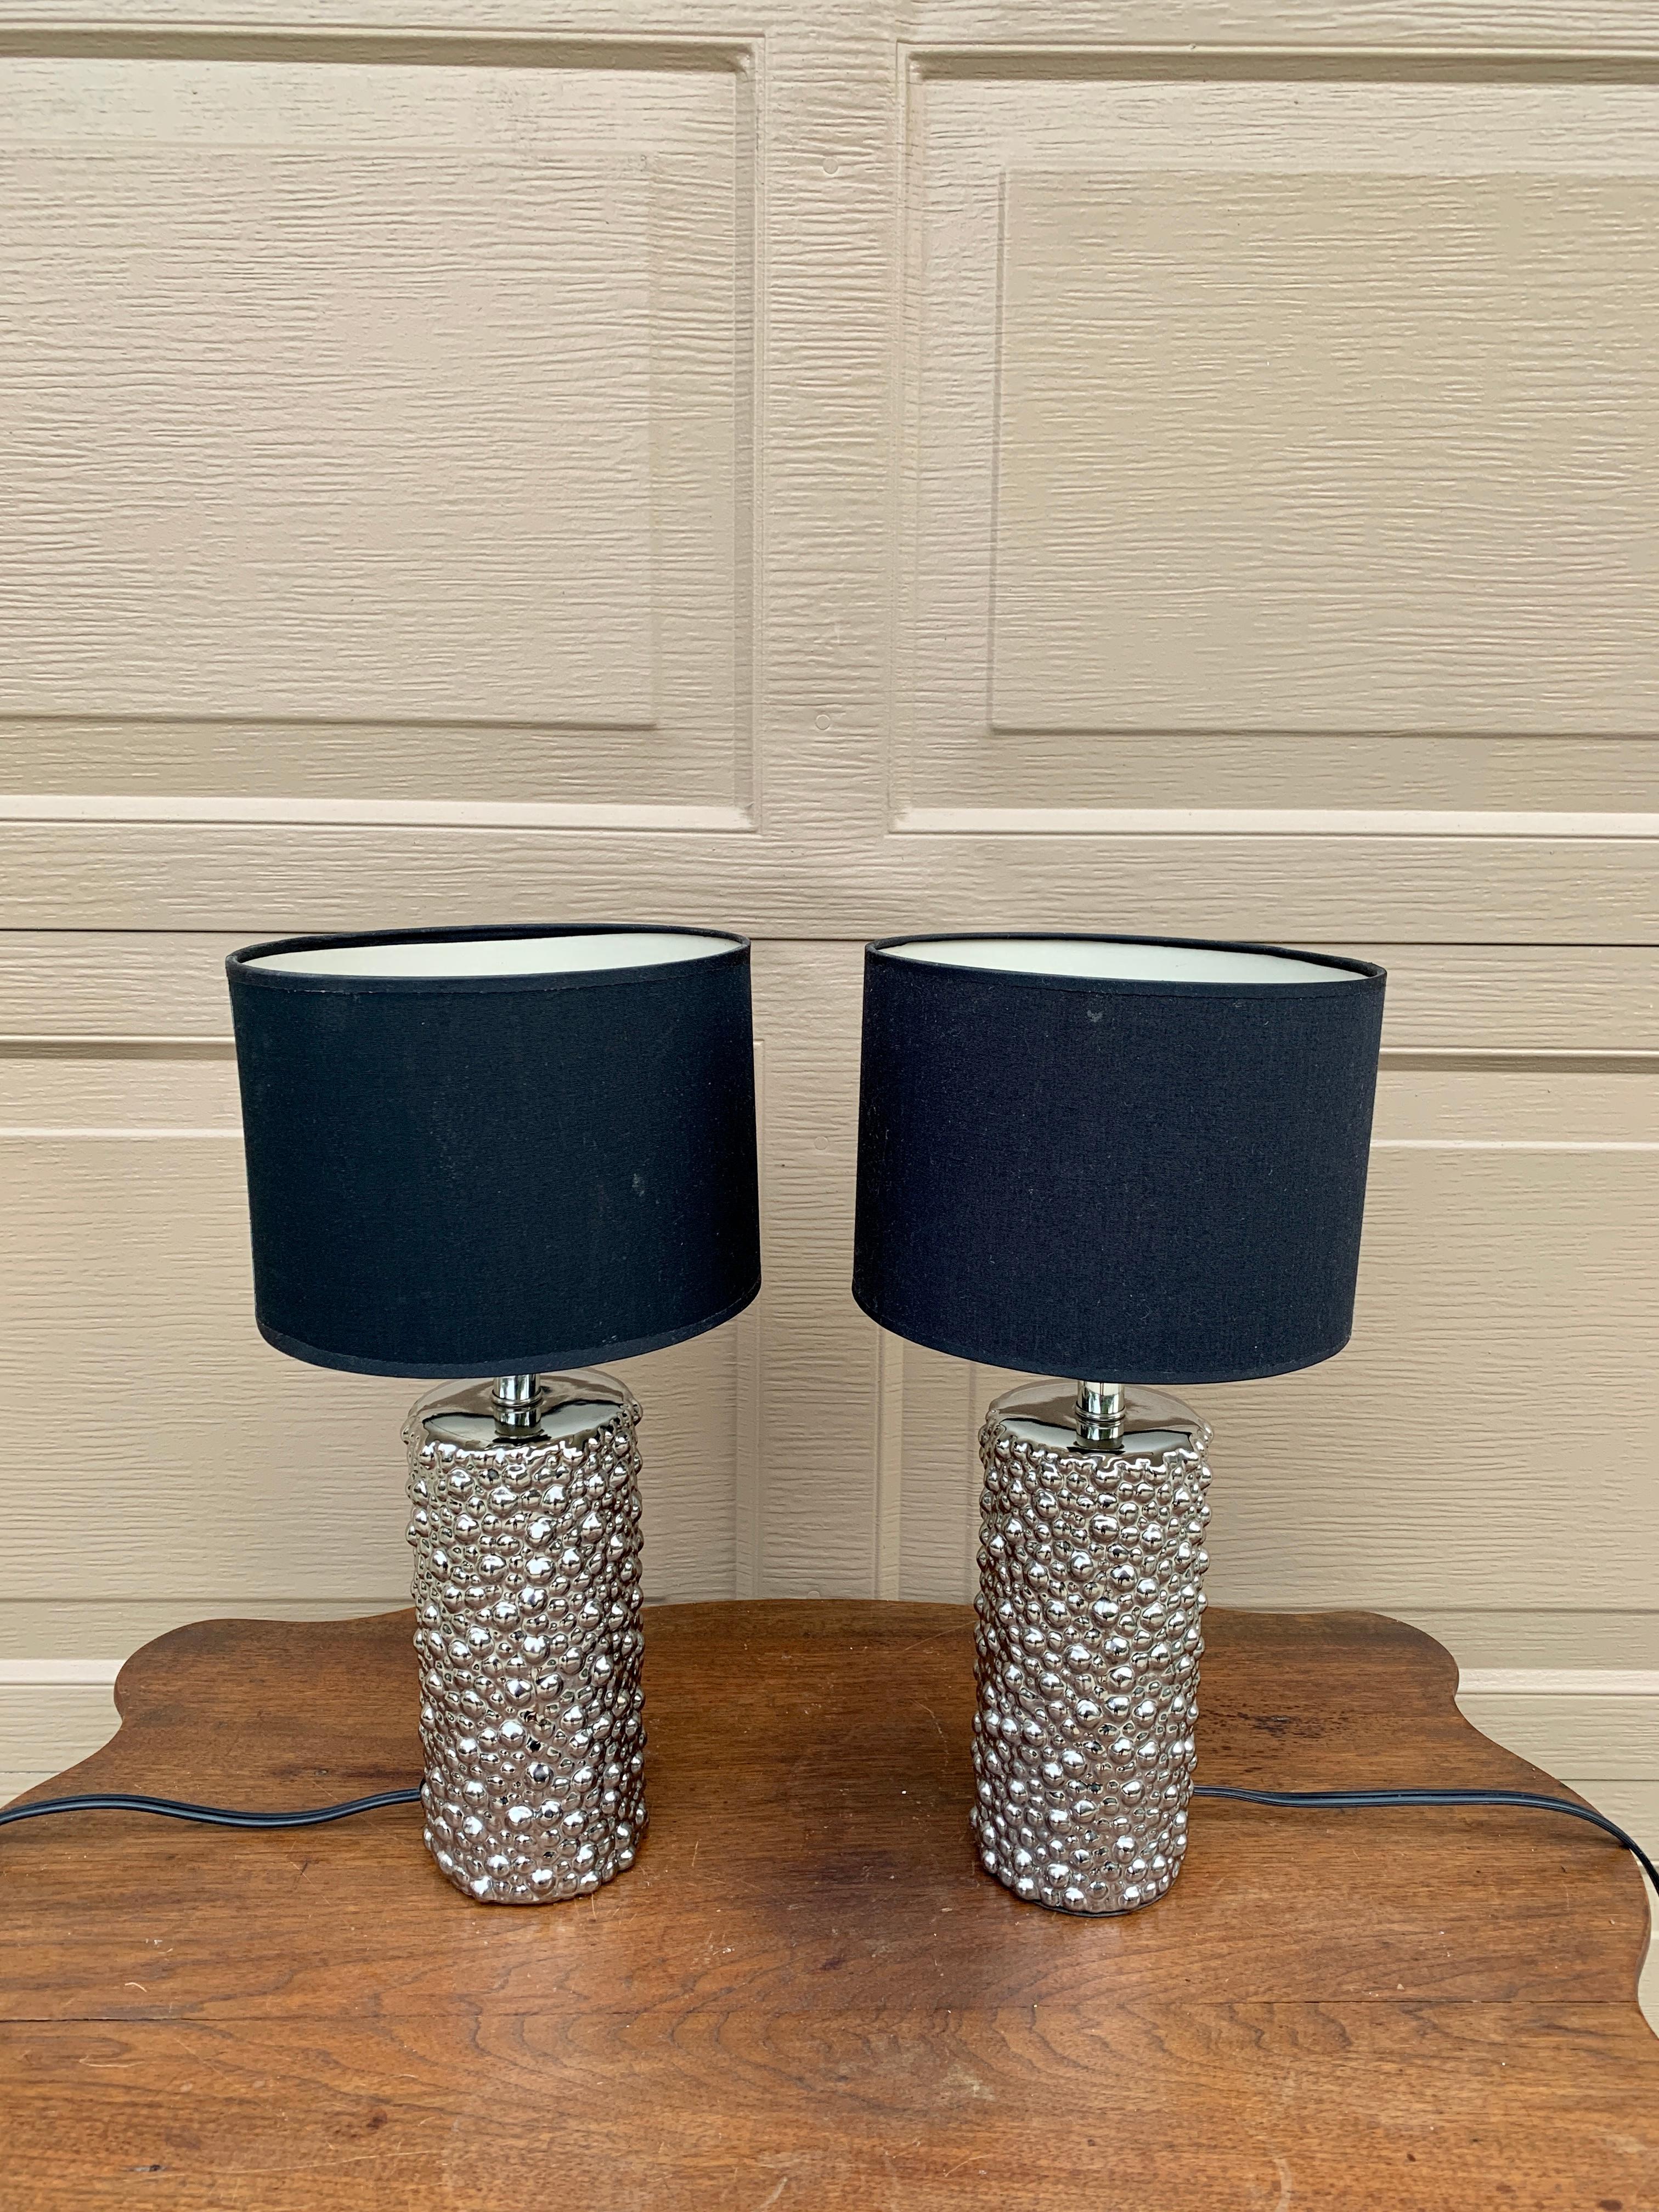 Contemporary Chrome Table Lamps with Black Drum Shades, Pair In Good Condition For Sale In Elkhart, IN